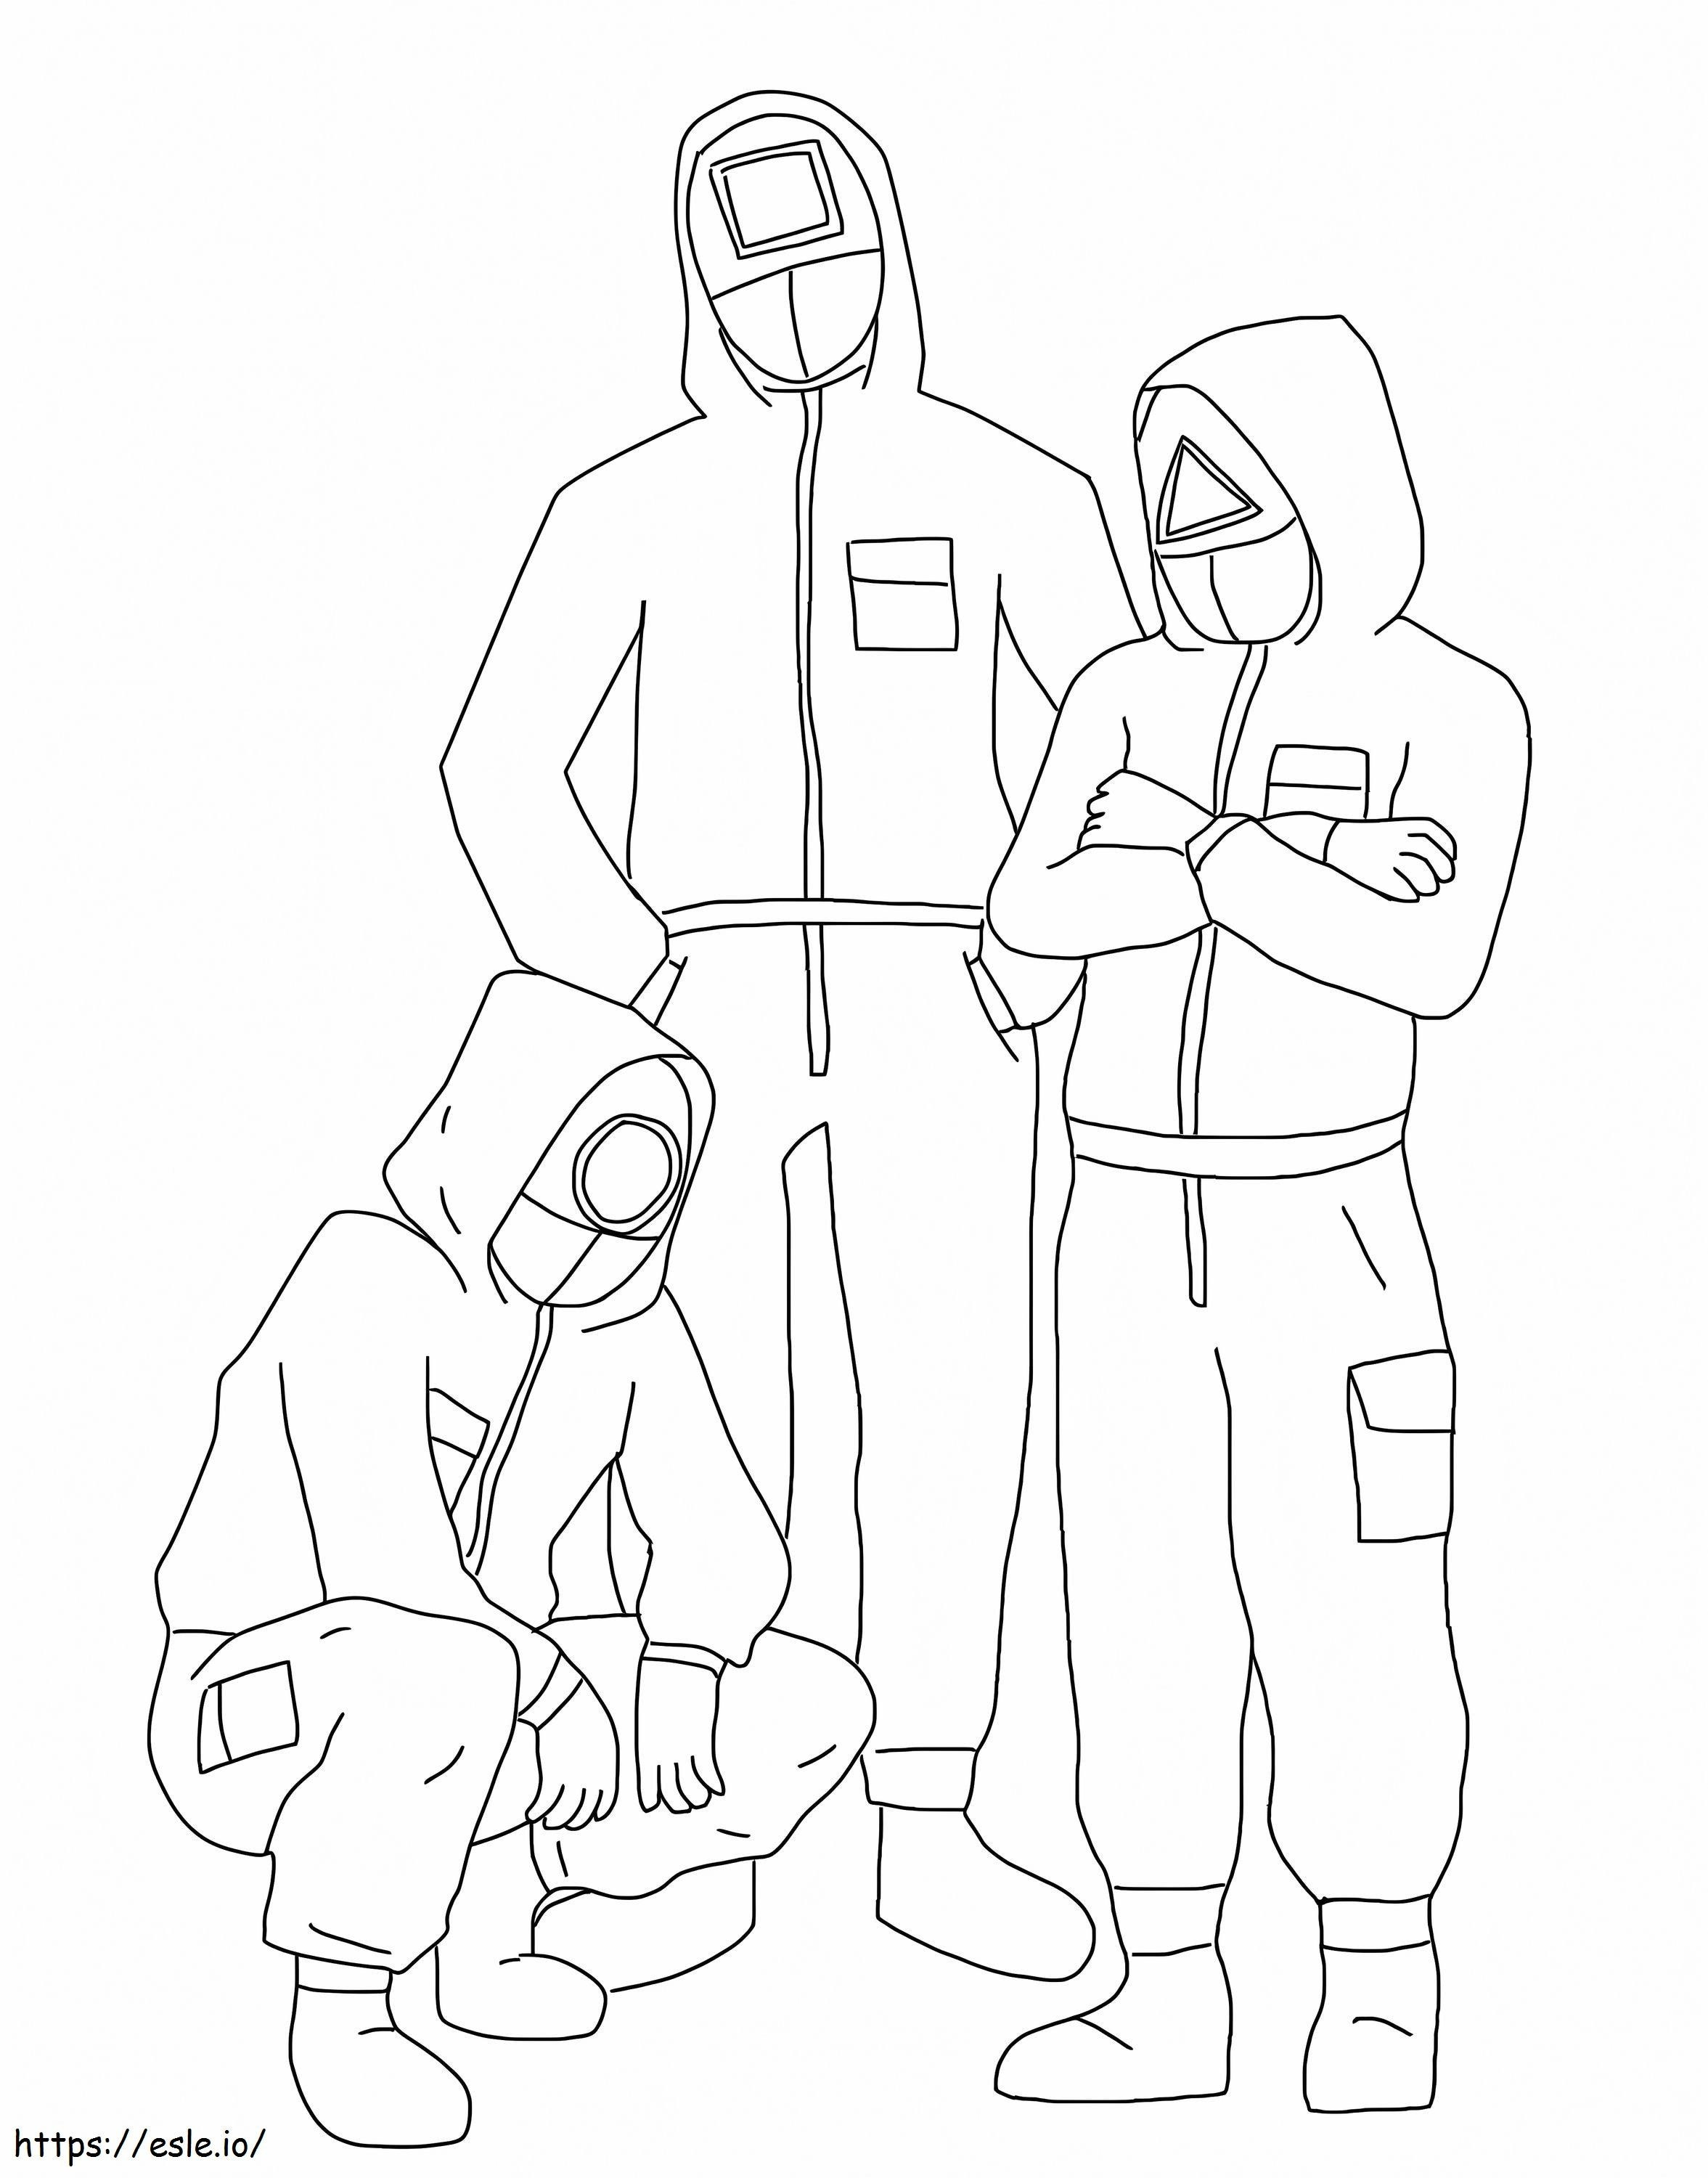 Three Squid Game Red Guards Uniforms coloring page